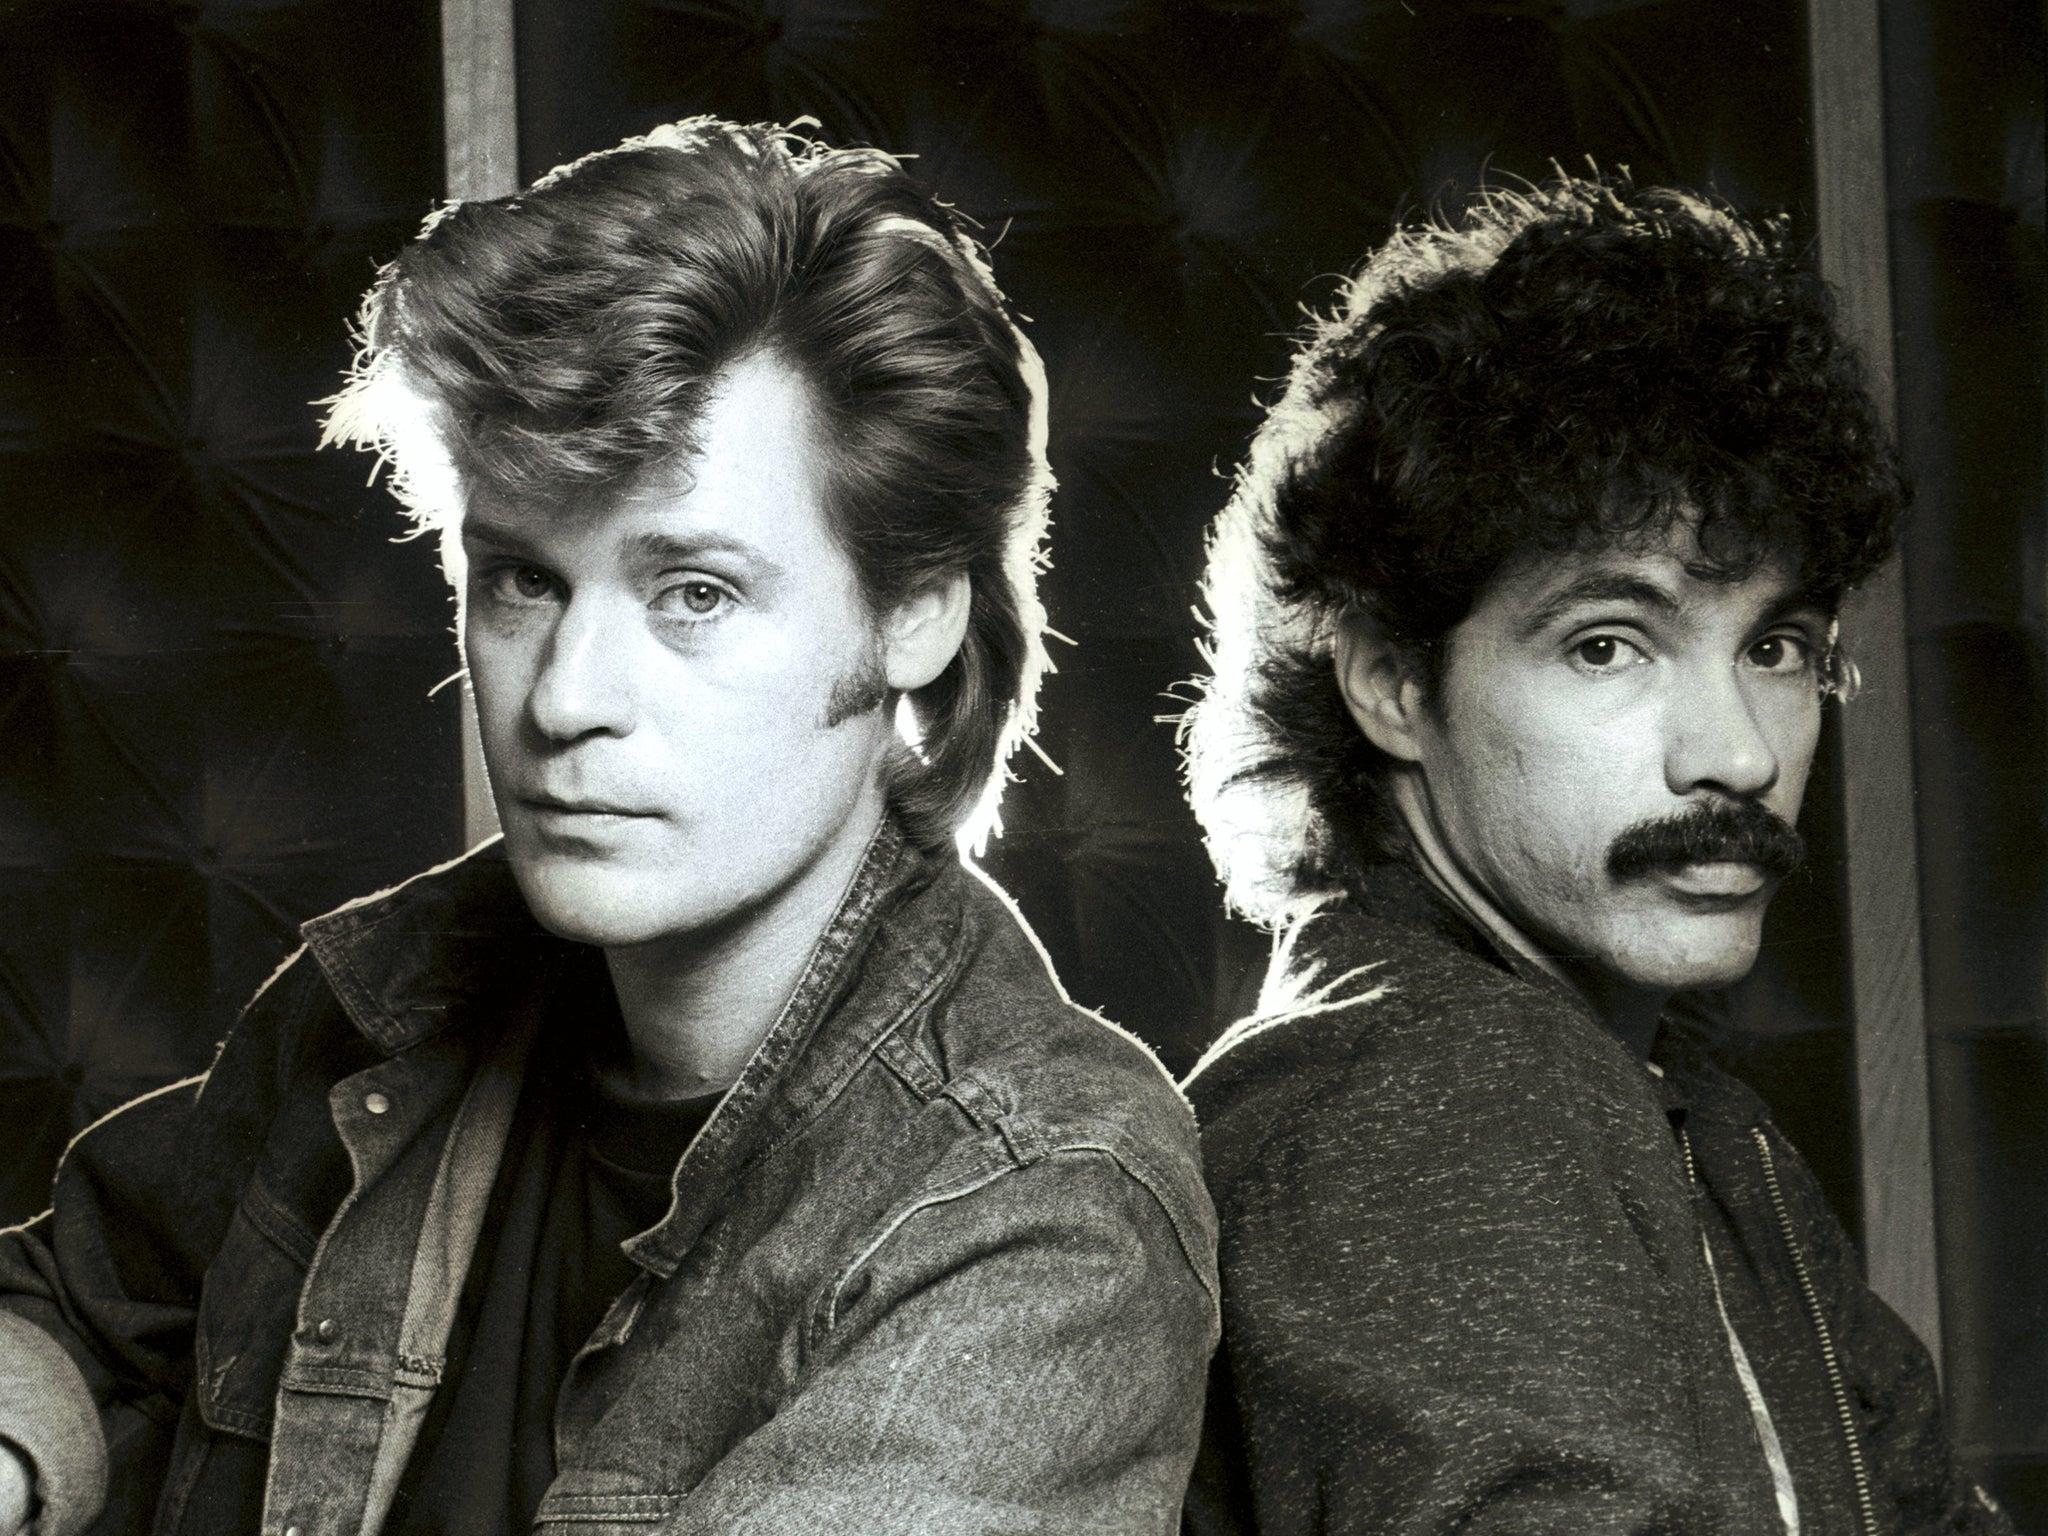 daryl hall, lawsuit, hall & oates: daryl hall files lawsuit and restraining order against john oates